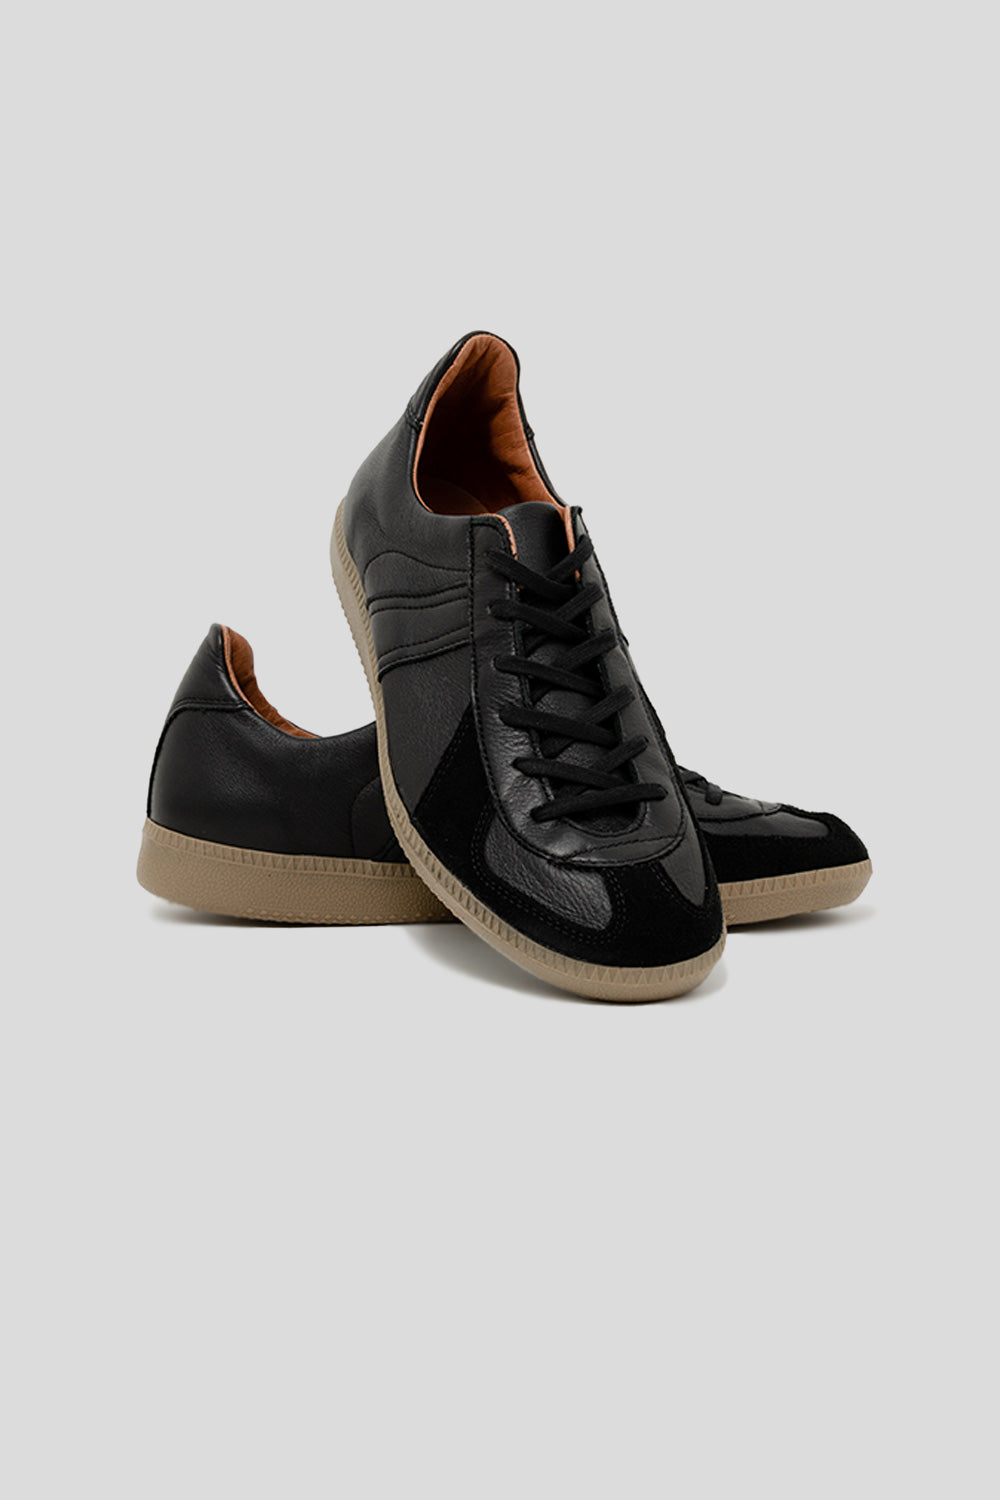 Reproduction of Found German Military Trainer in Black | Wallace